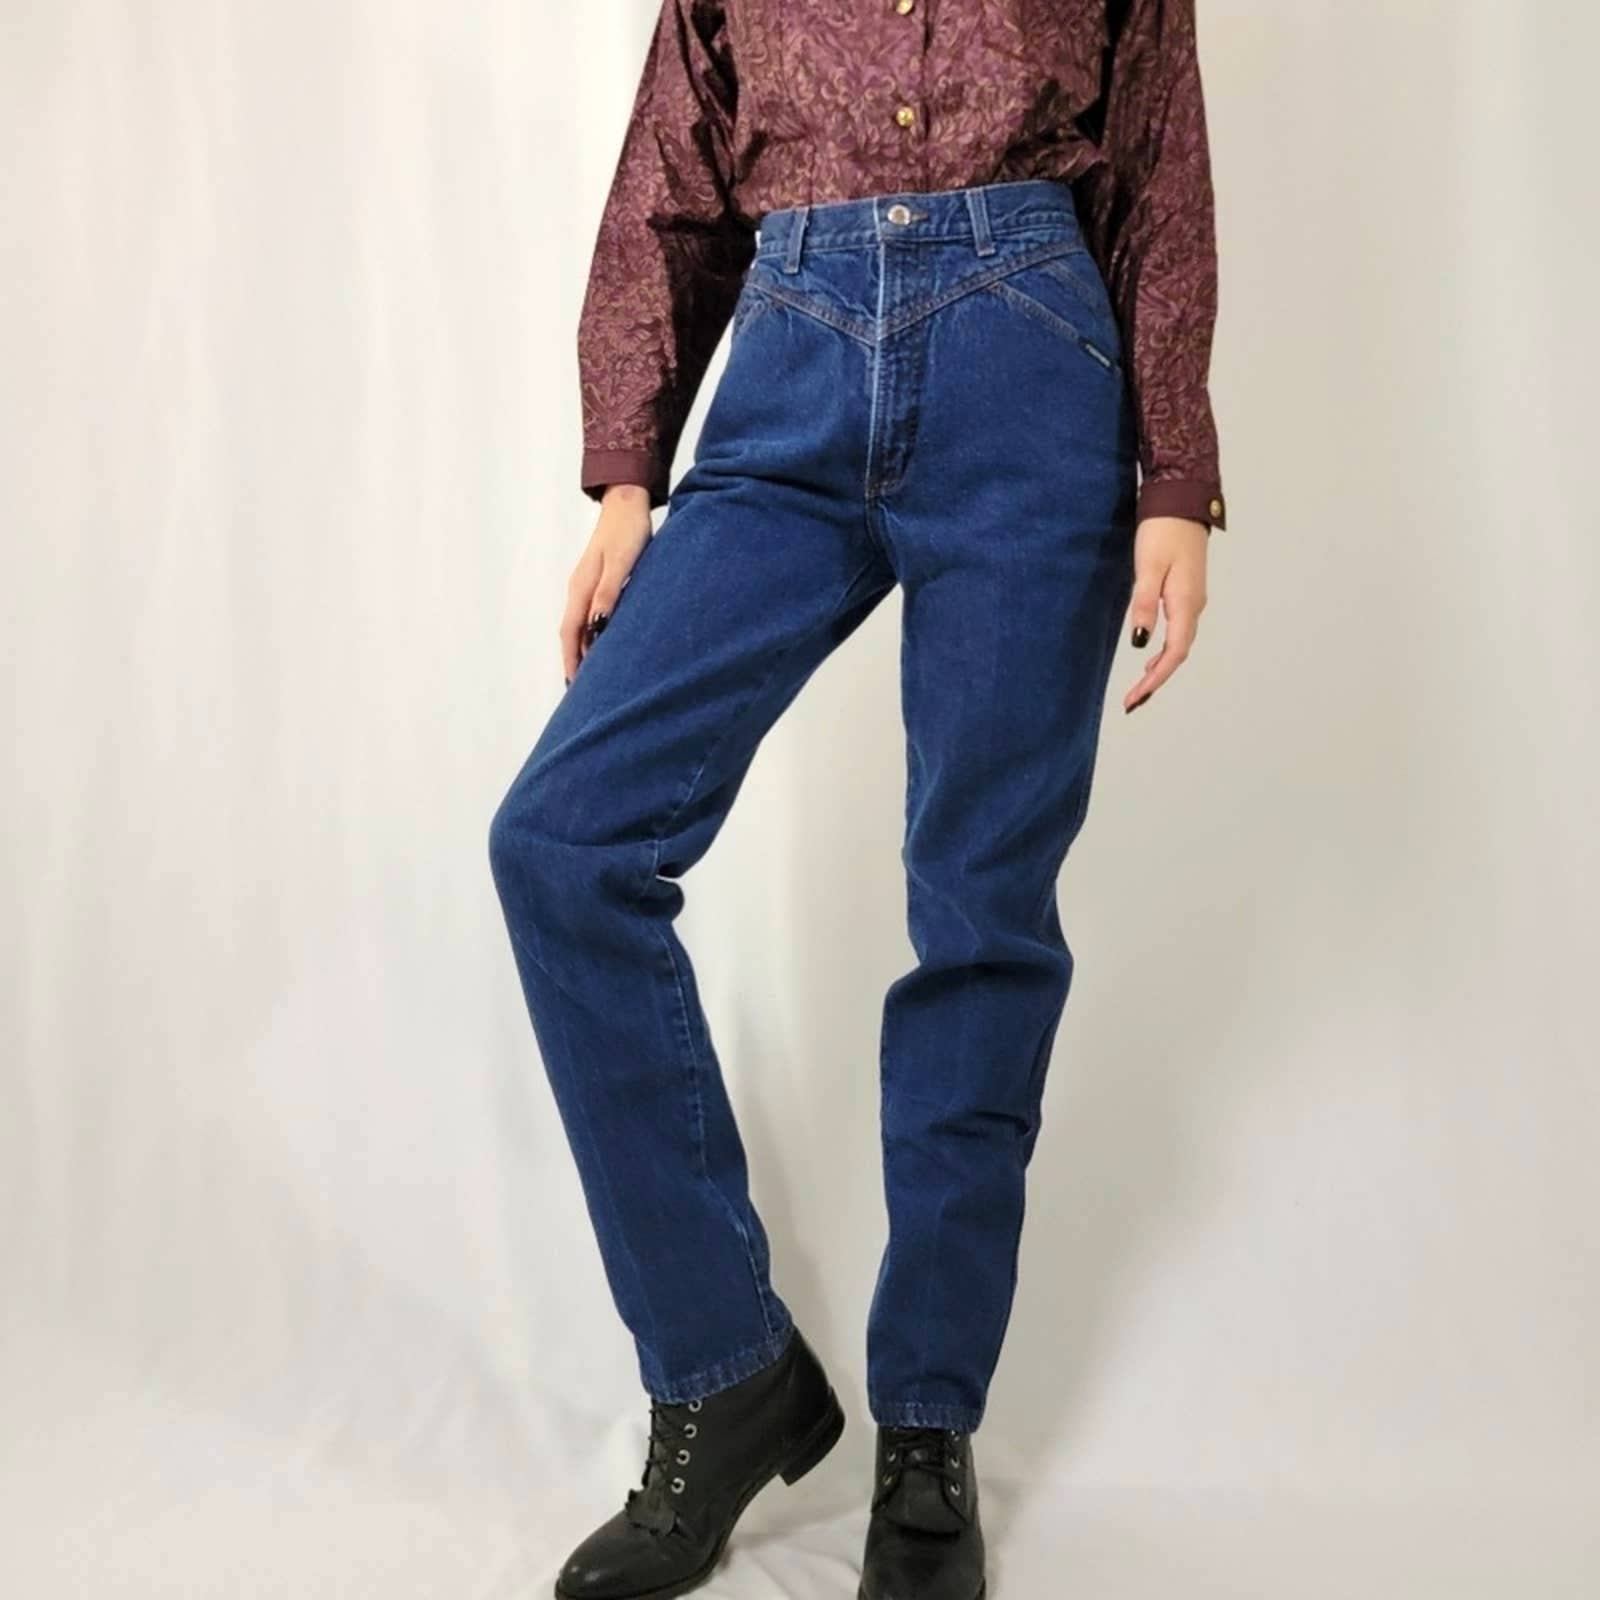 Vintage 80s Rockies High Rise Western Denim Jeans in a Faded 